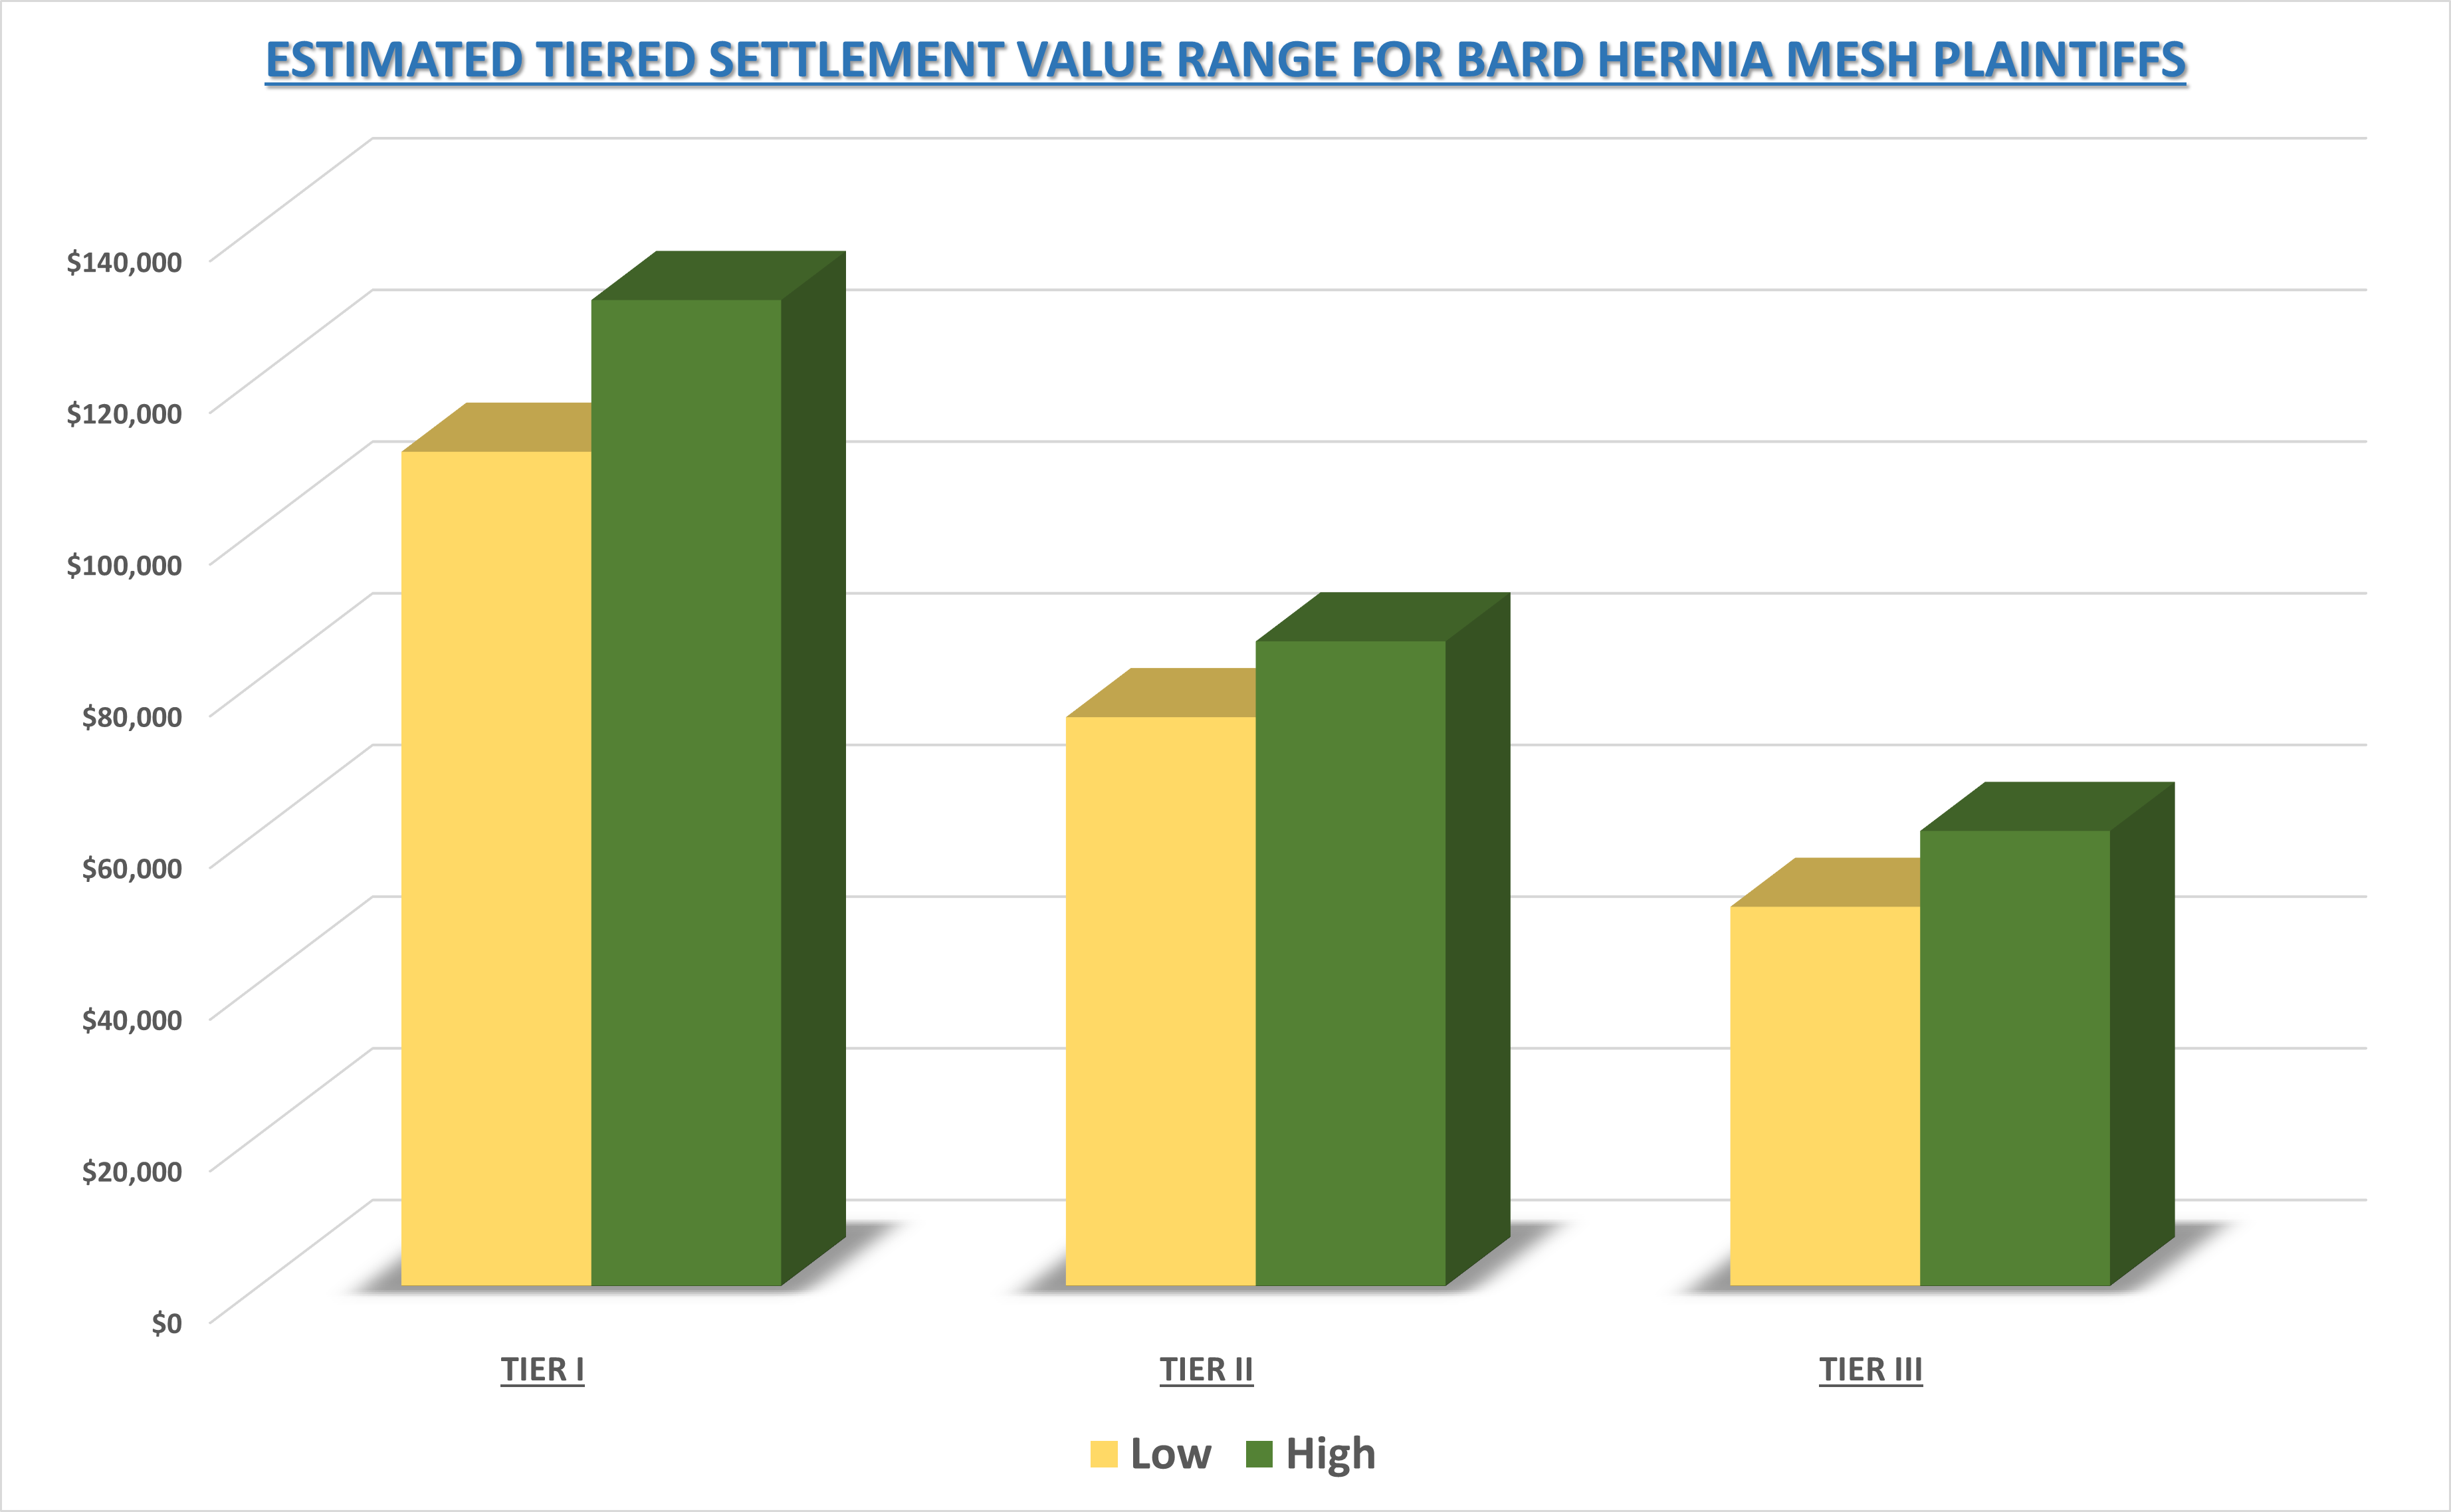 Value of Bard Hernia Mesh Lawsuits